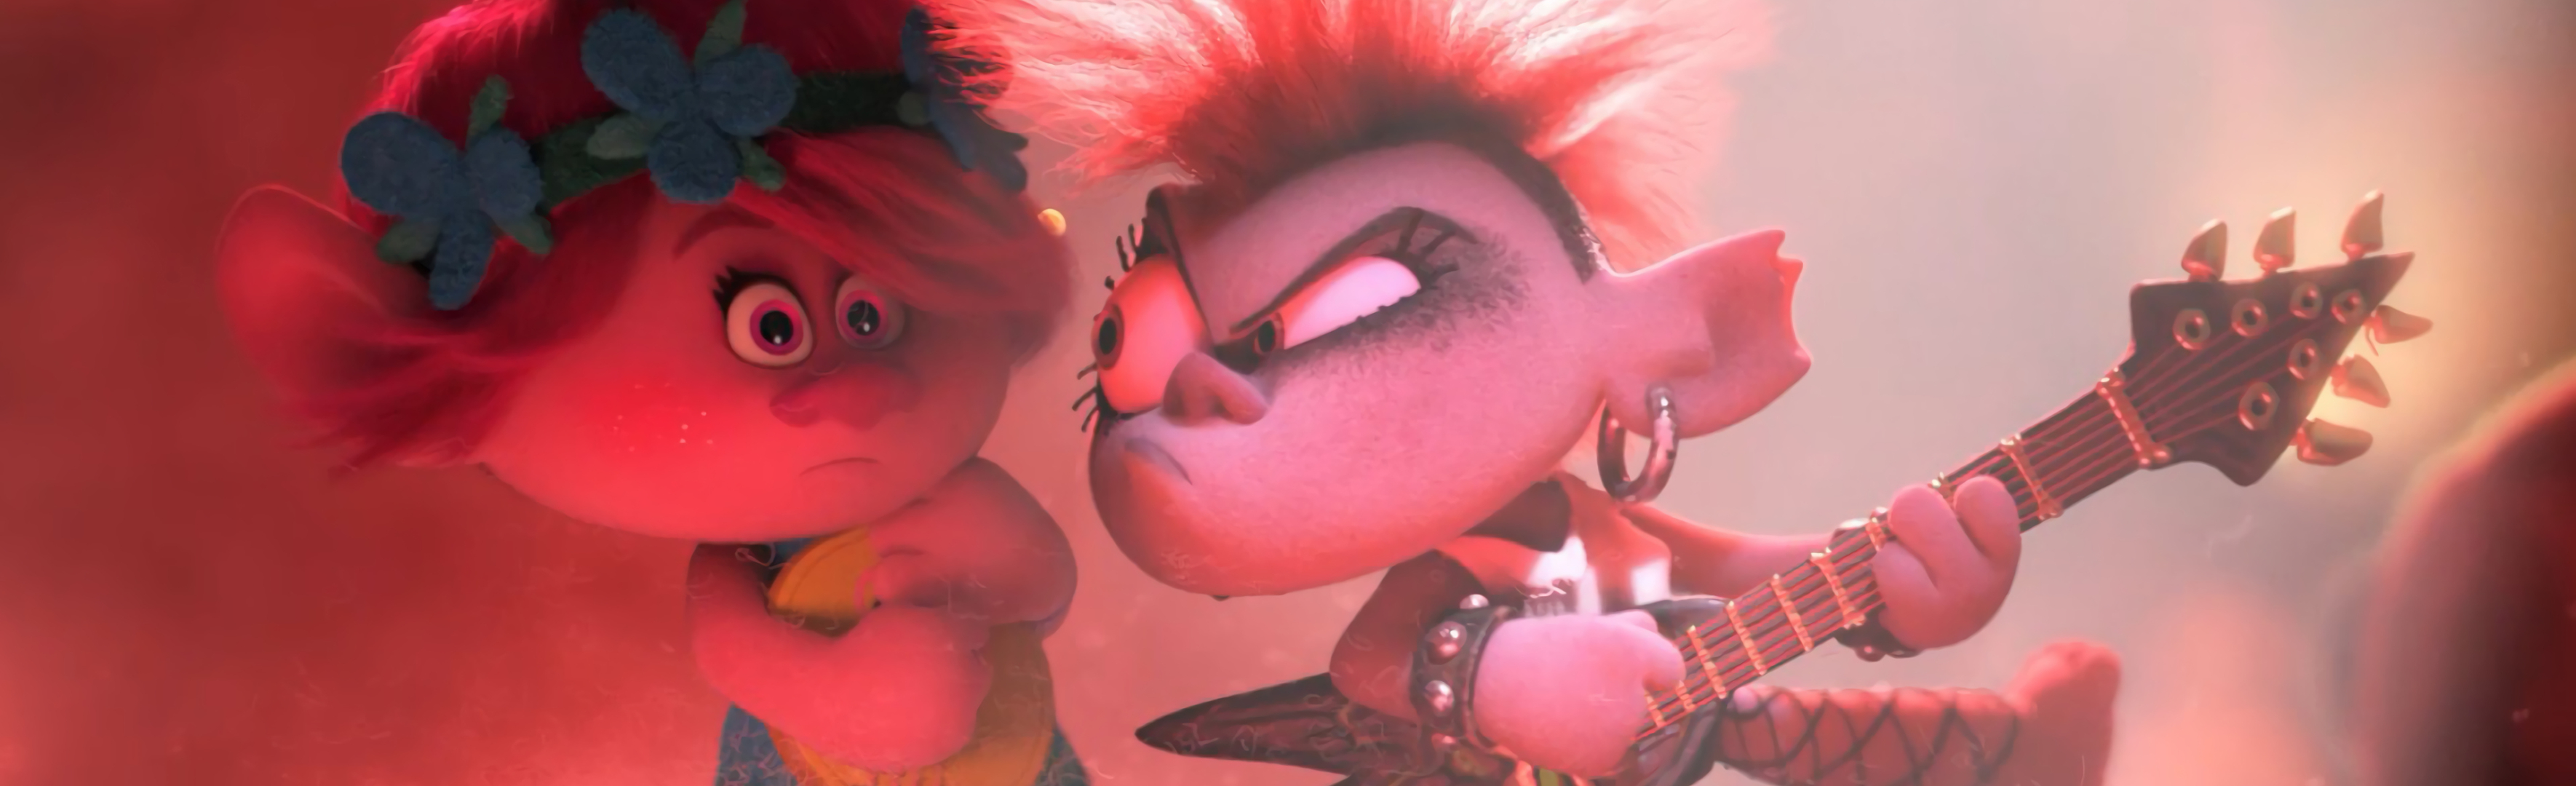 3540x1080 Resolution Poppy and Queen Barb In Trolls World Tour ...